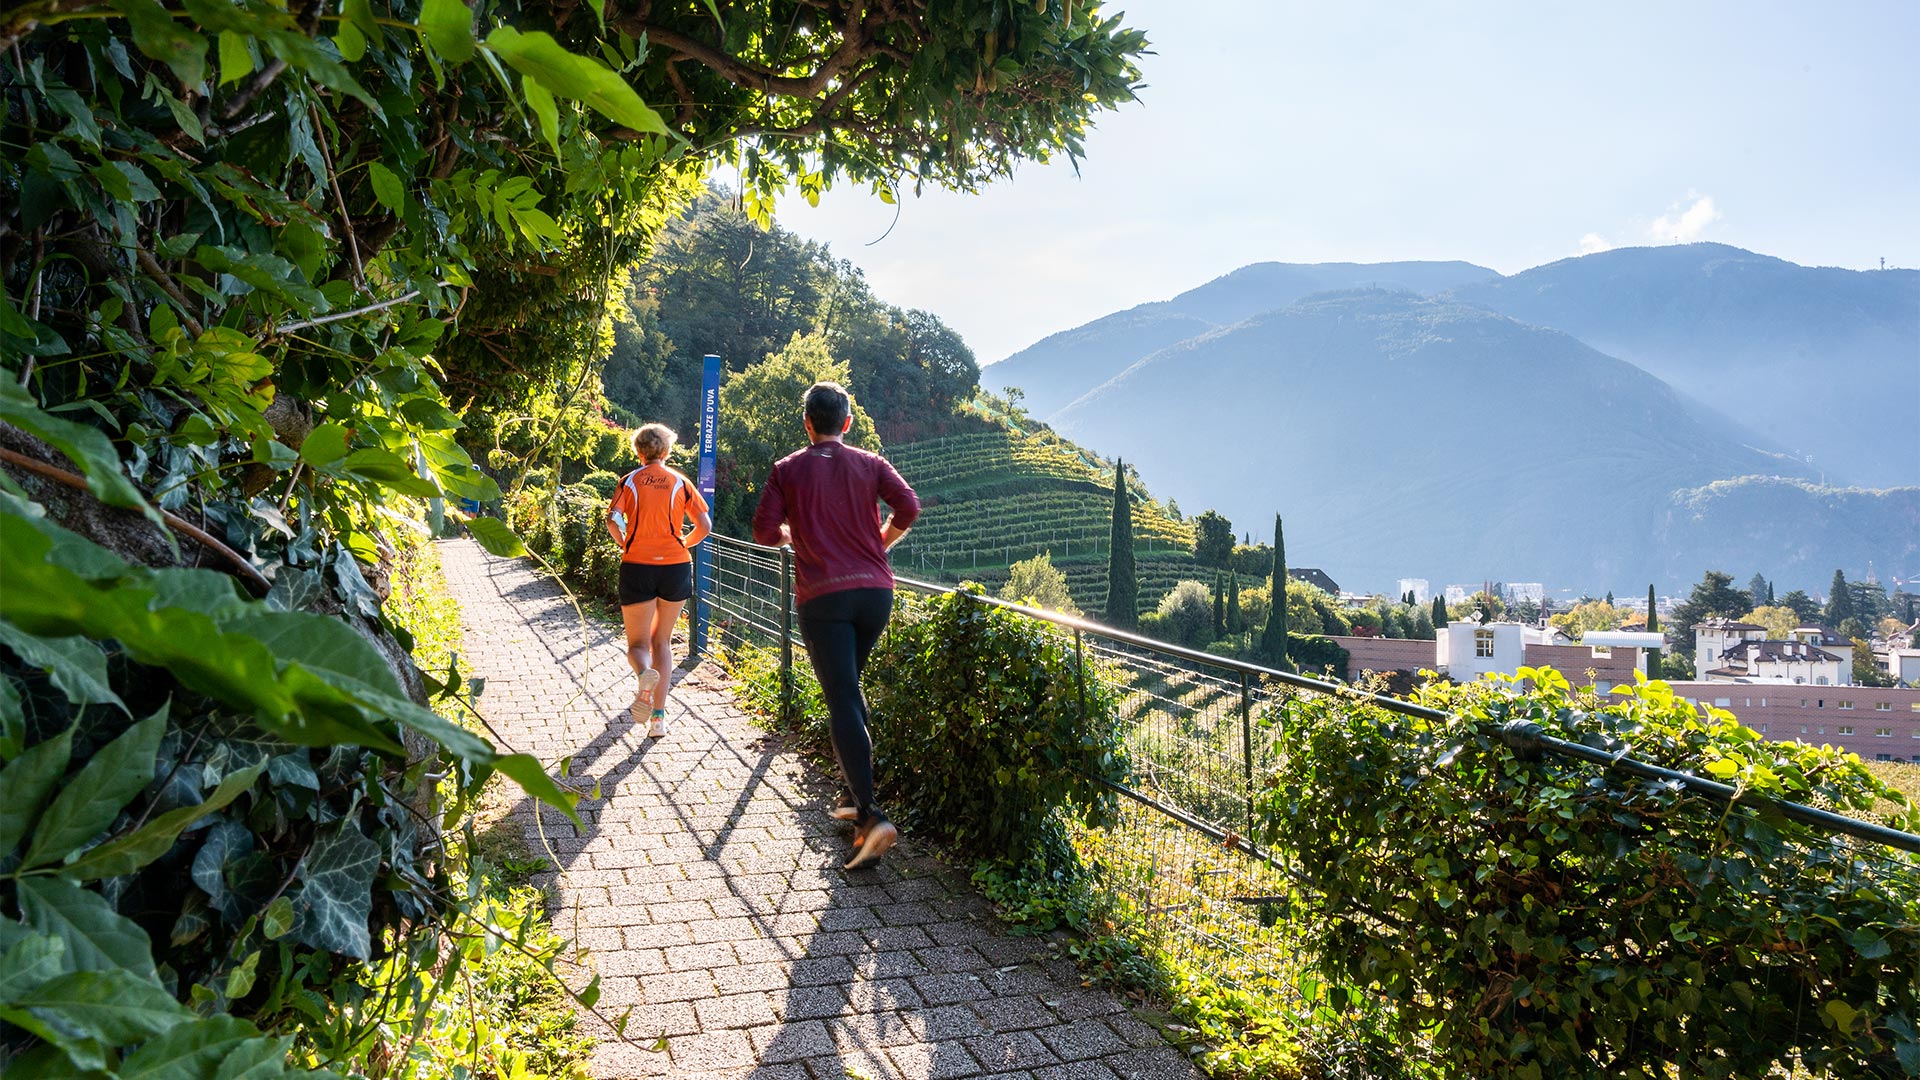 On a summer or spring morning, the best way to find inspiration is to jog along the paths of Bolzano.